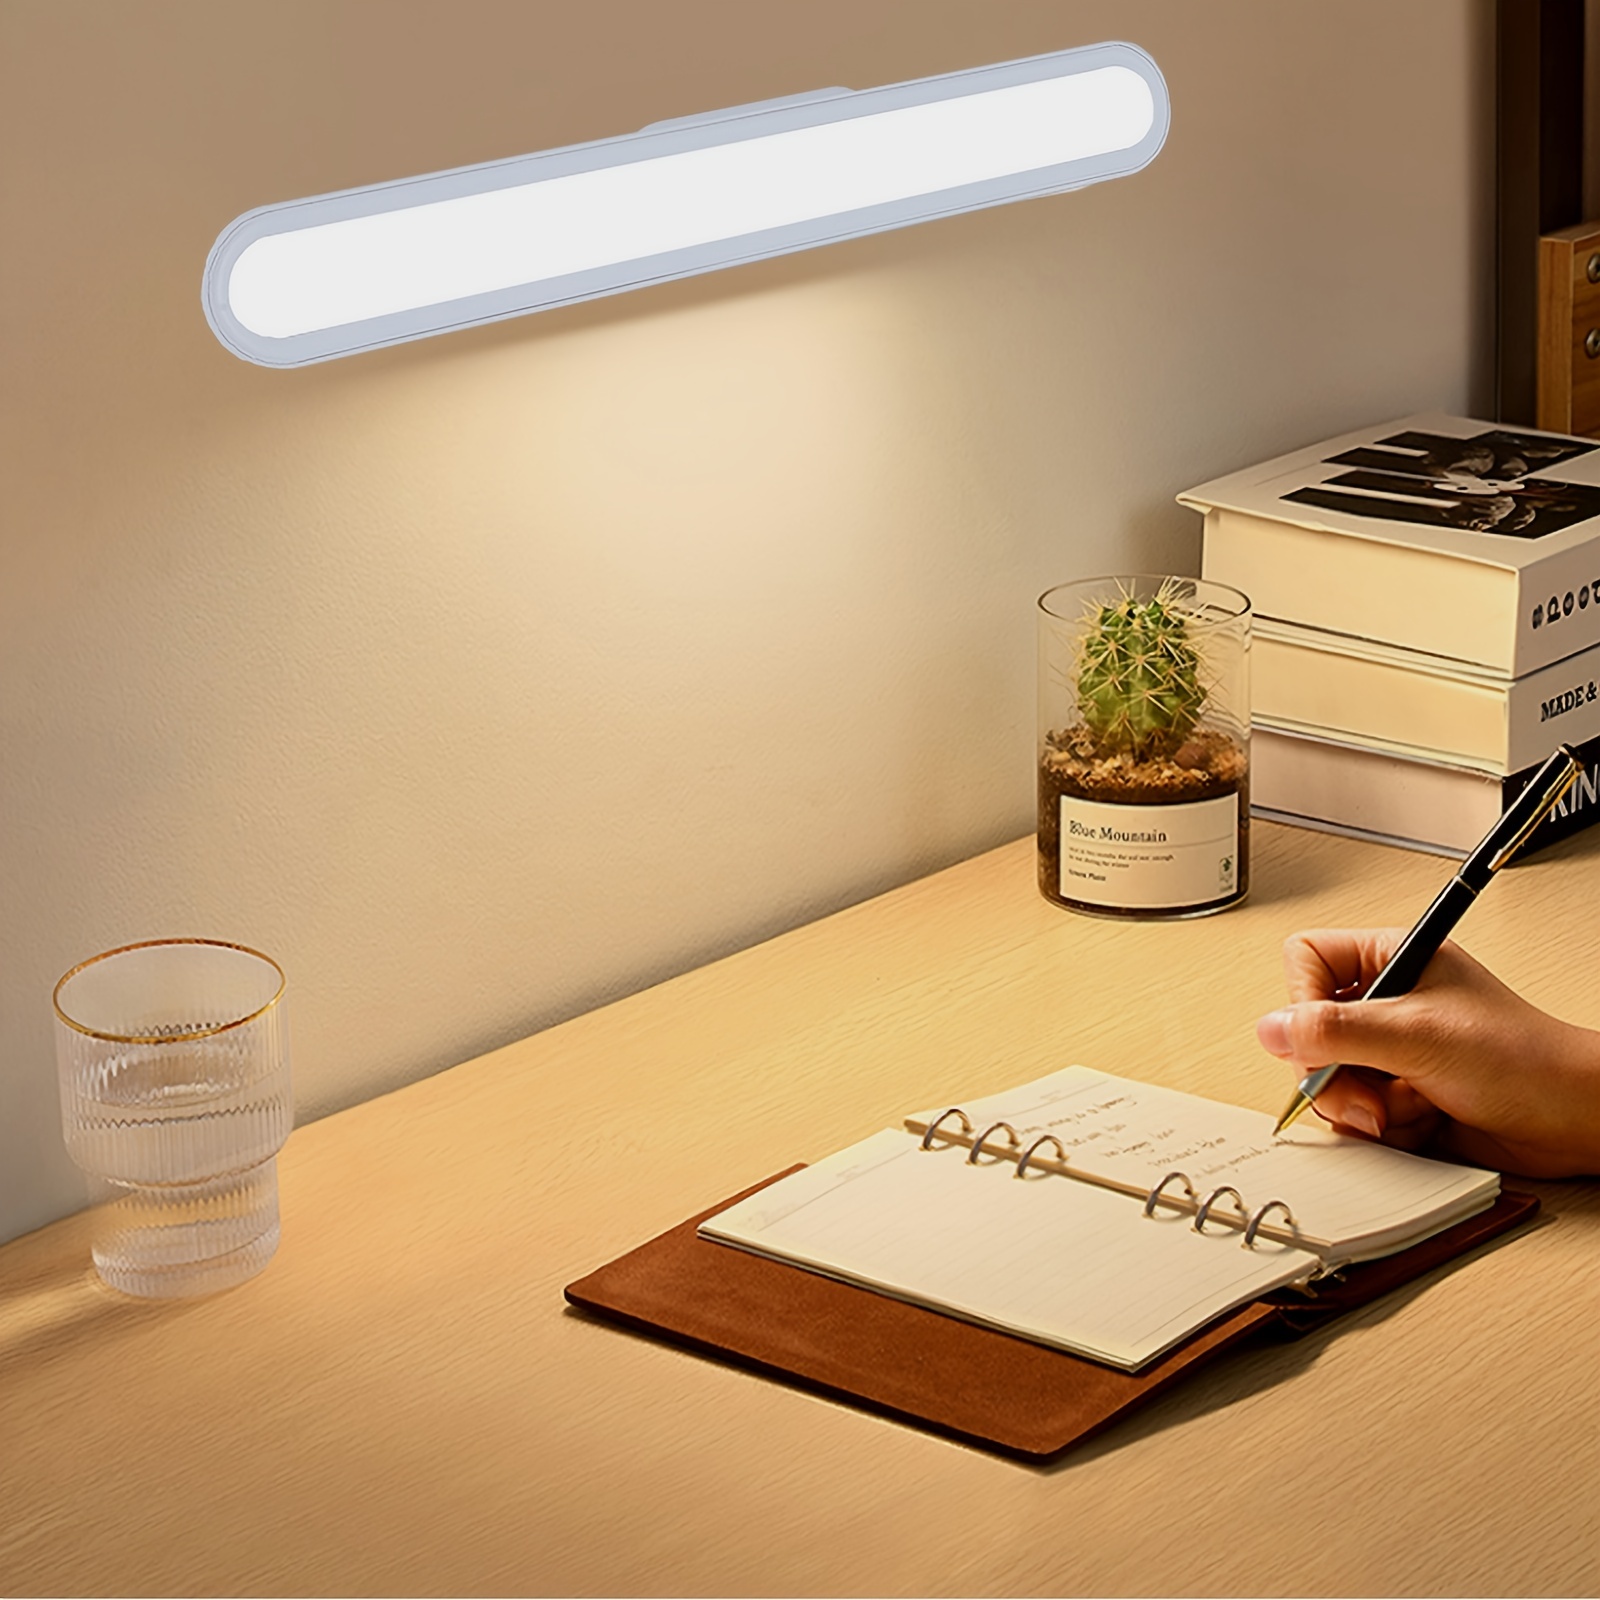 Wireless Dimmable Touch Light Bar - Adjustable Color Temperature & Brightness - Rechargeable USB C Powered